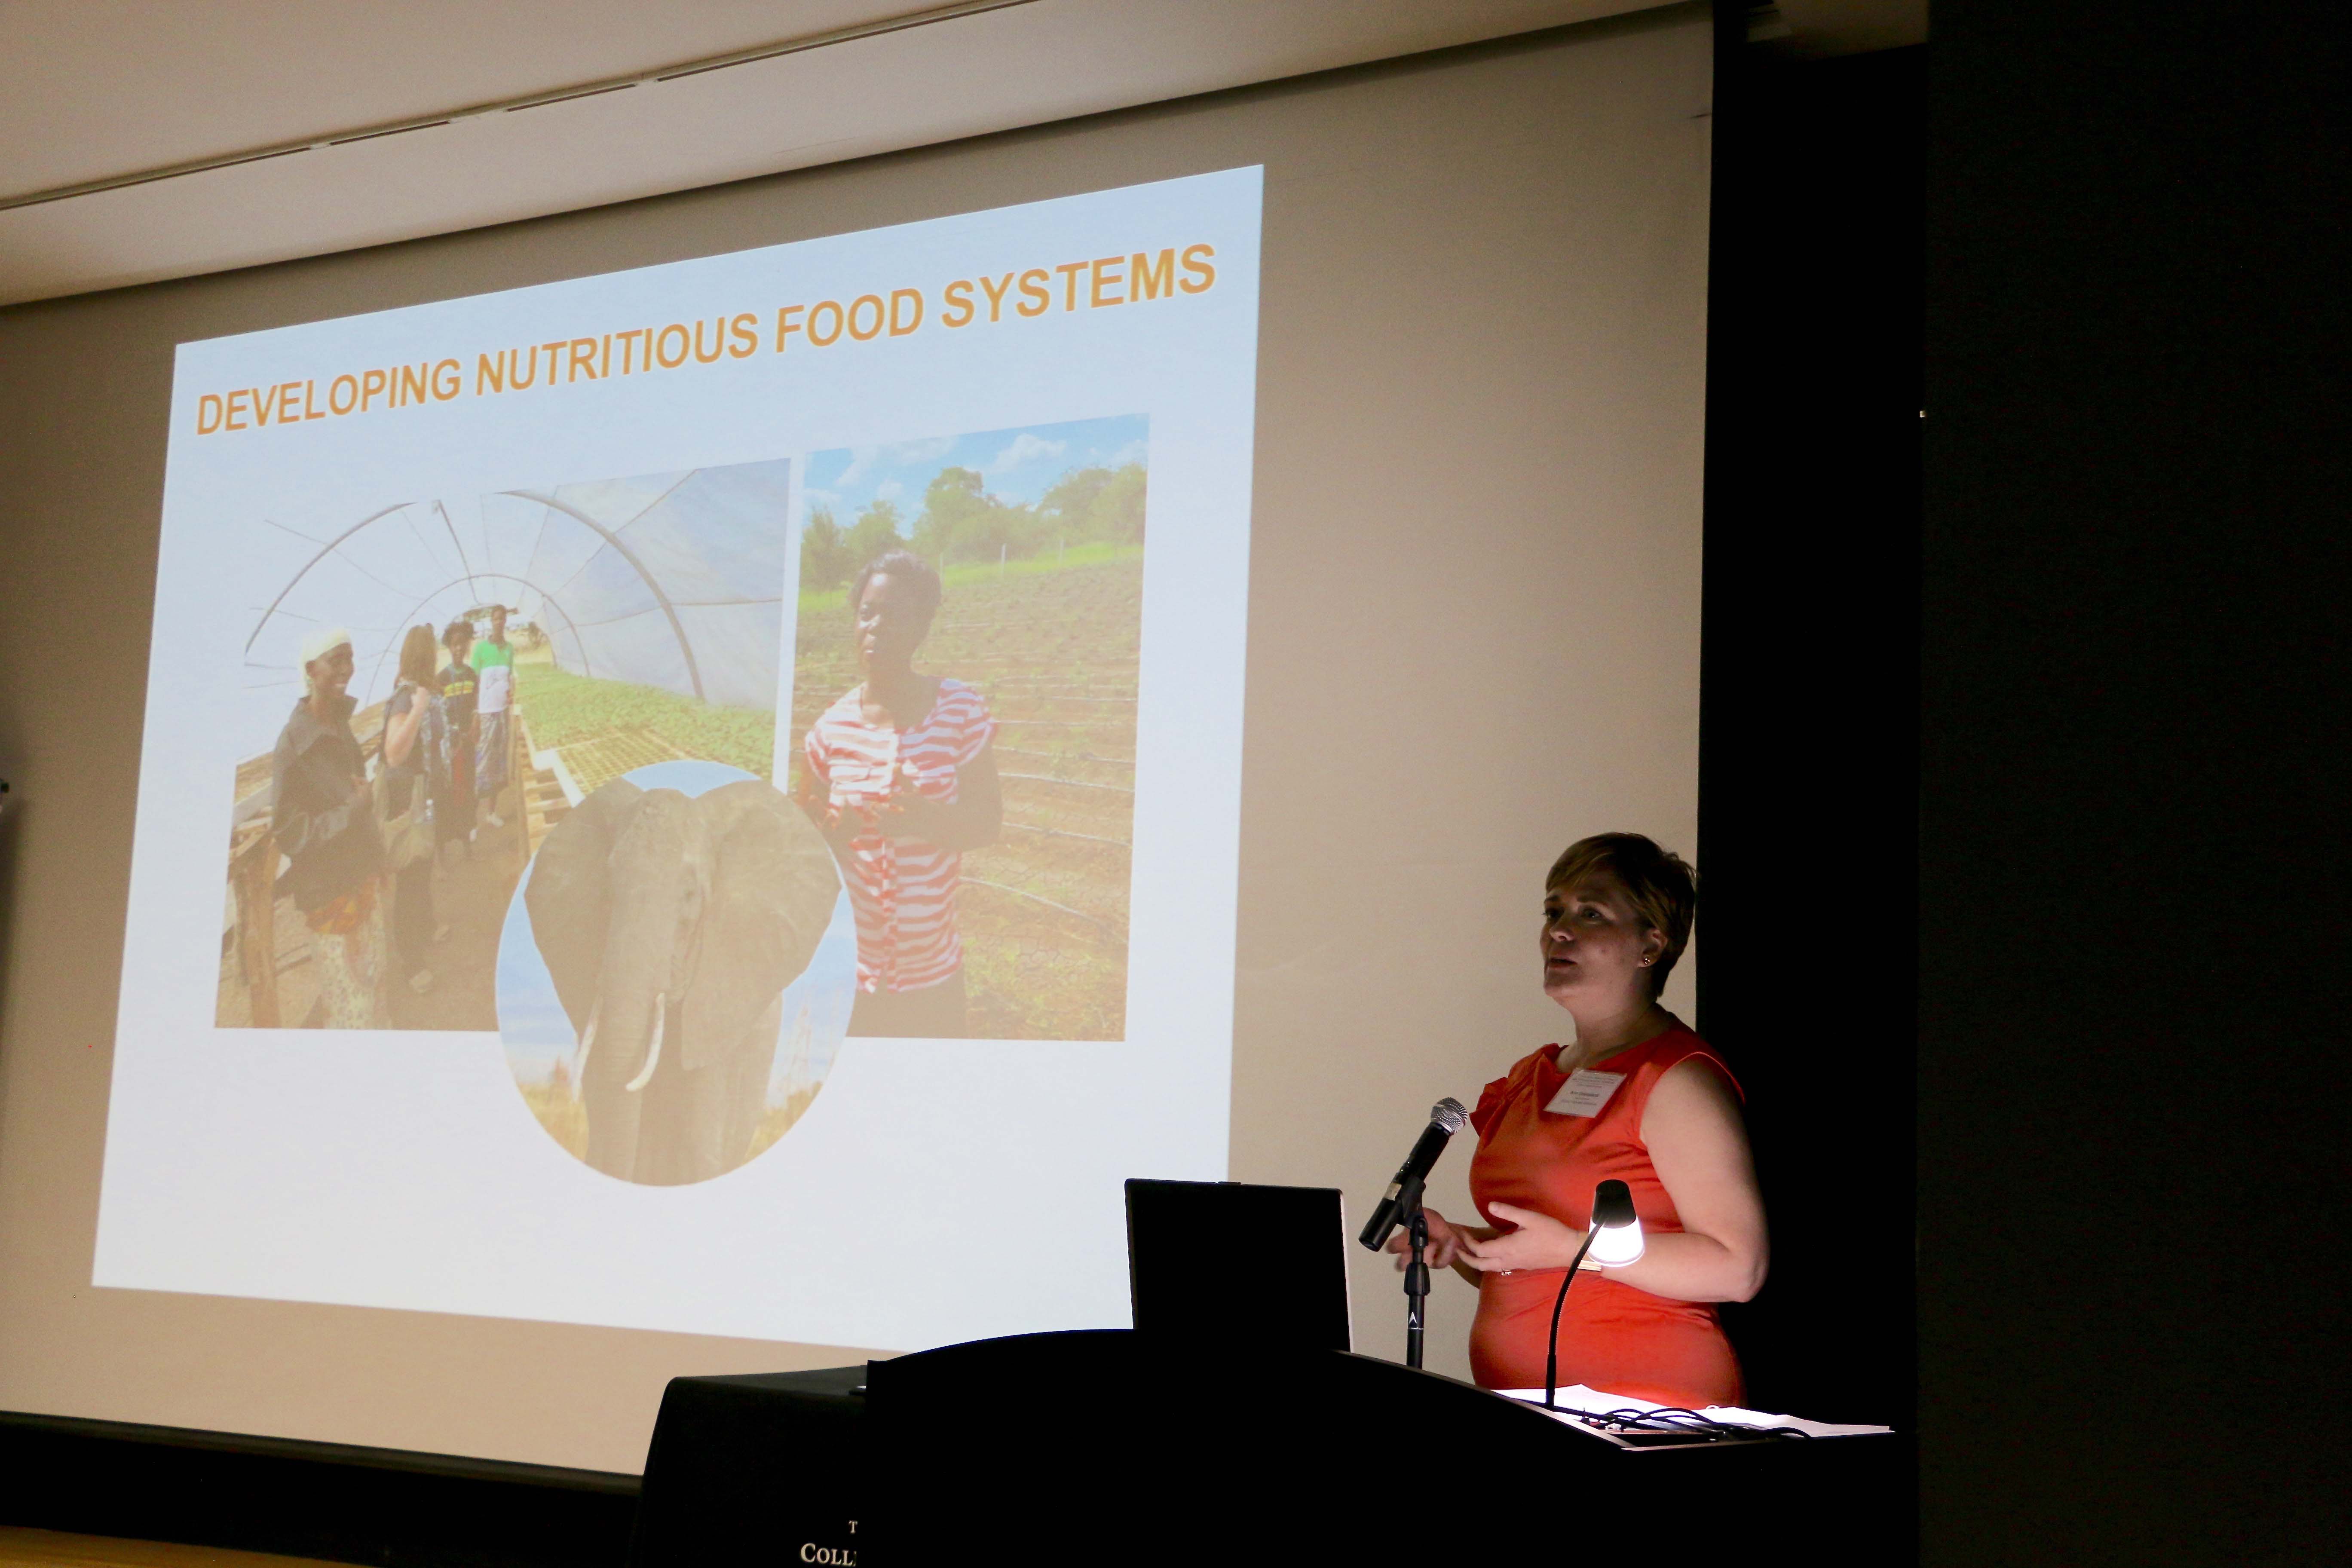 Keynote speaker Ann M. Steensland, deputy director of the Global Harvest Initiative, told students and faculty that successful solutions for feeding the world's hungry have to be created in concert with the farmers and community members on the ground in developing countries and in our own backyard.